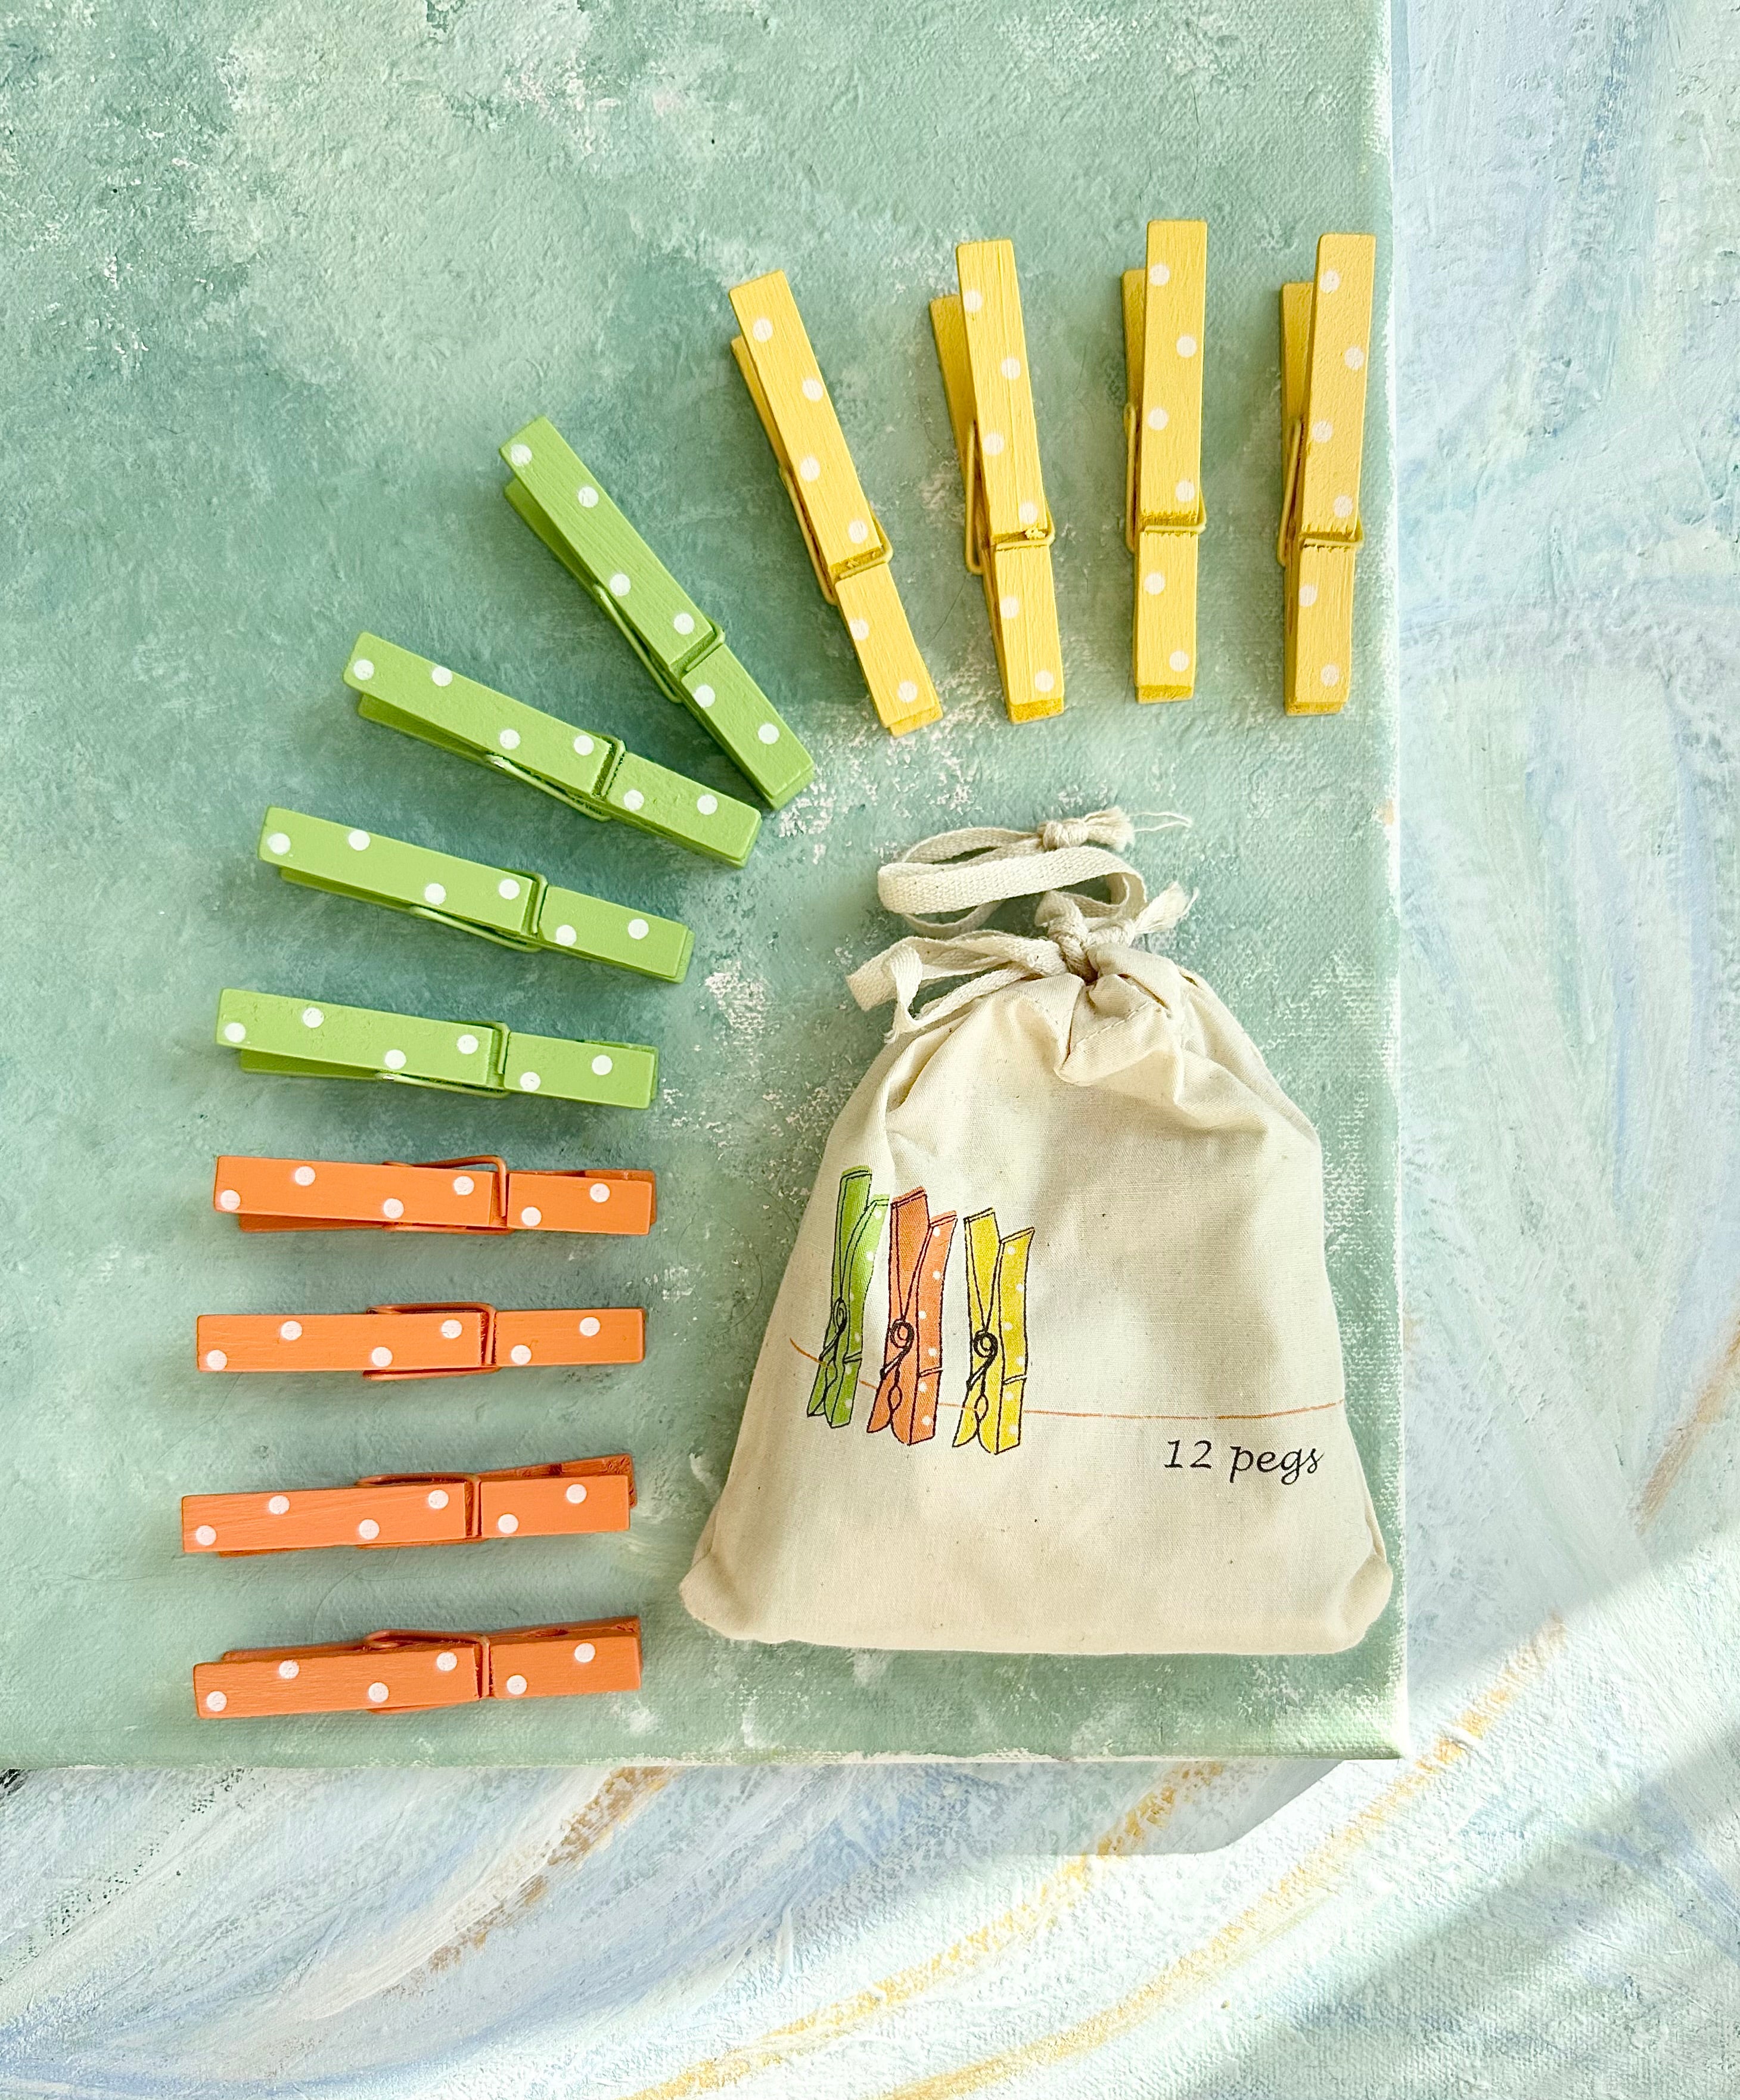 Spring Pegs in a Bag - 2012